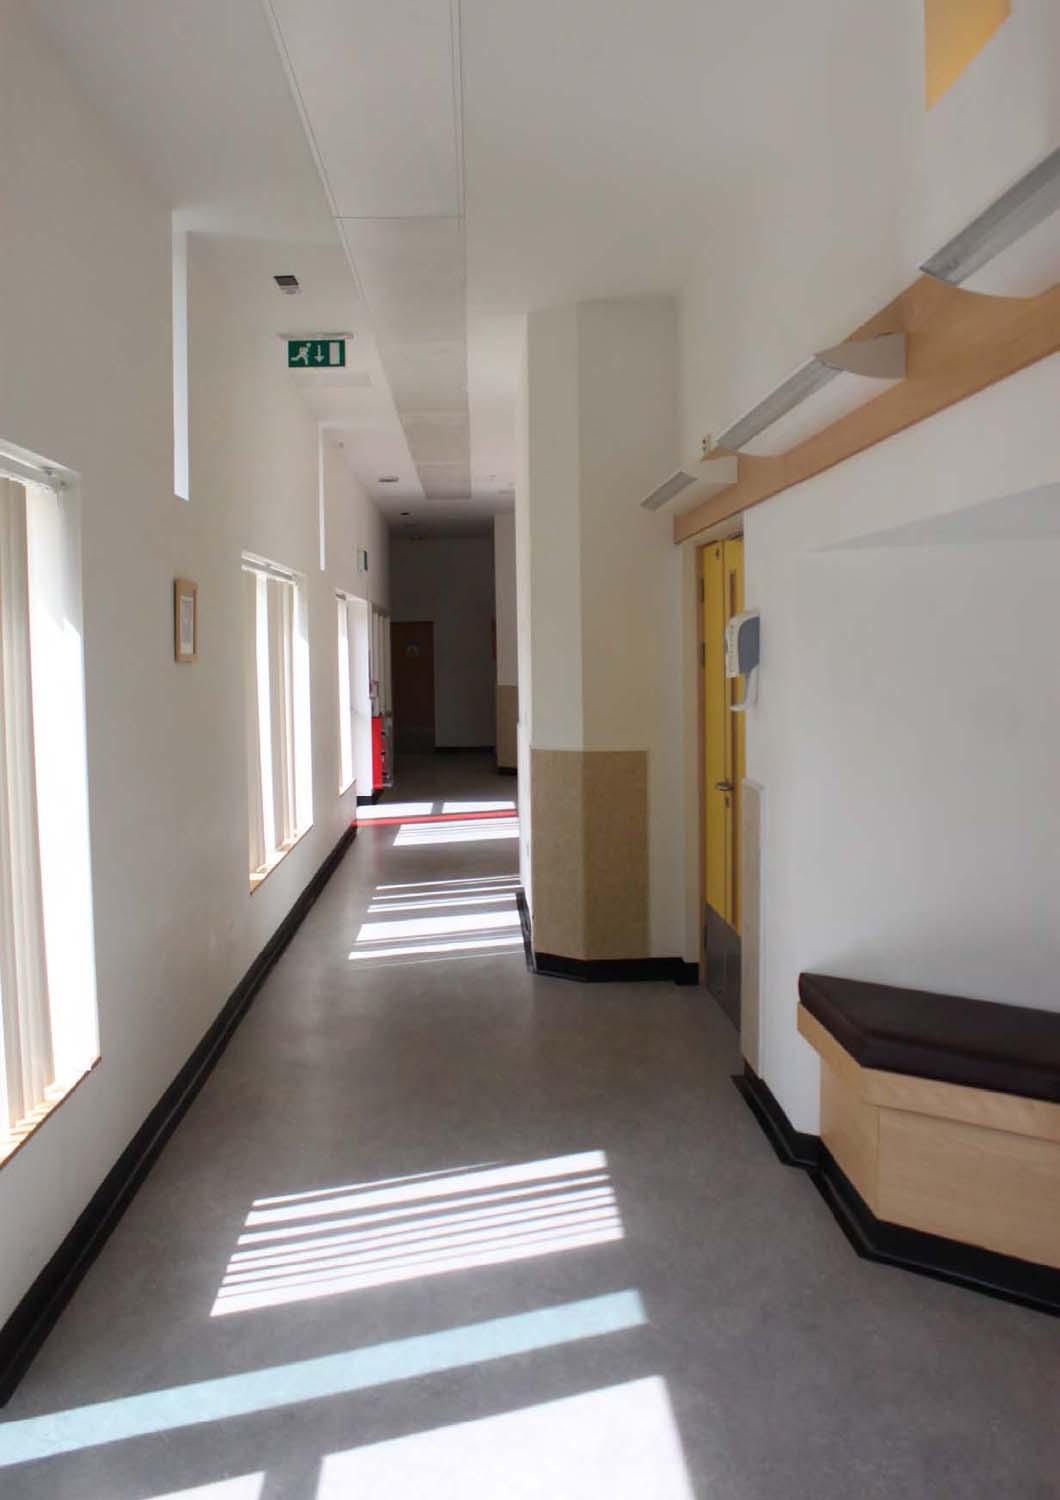 A corridor in Elmview and Muirview Wards with white walls, cement flooring and black padded seating area.